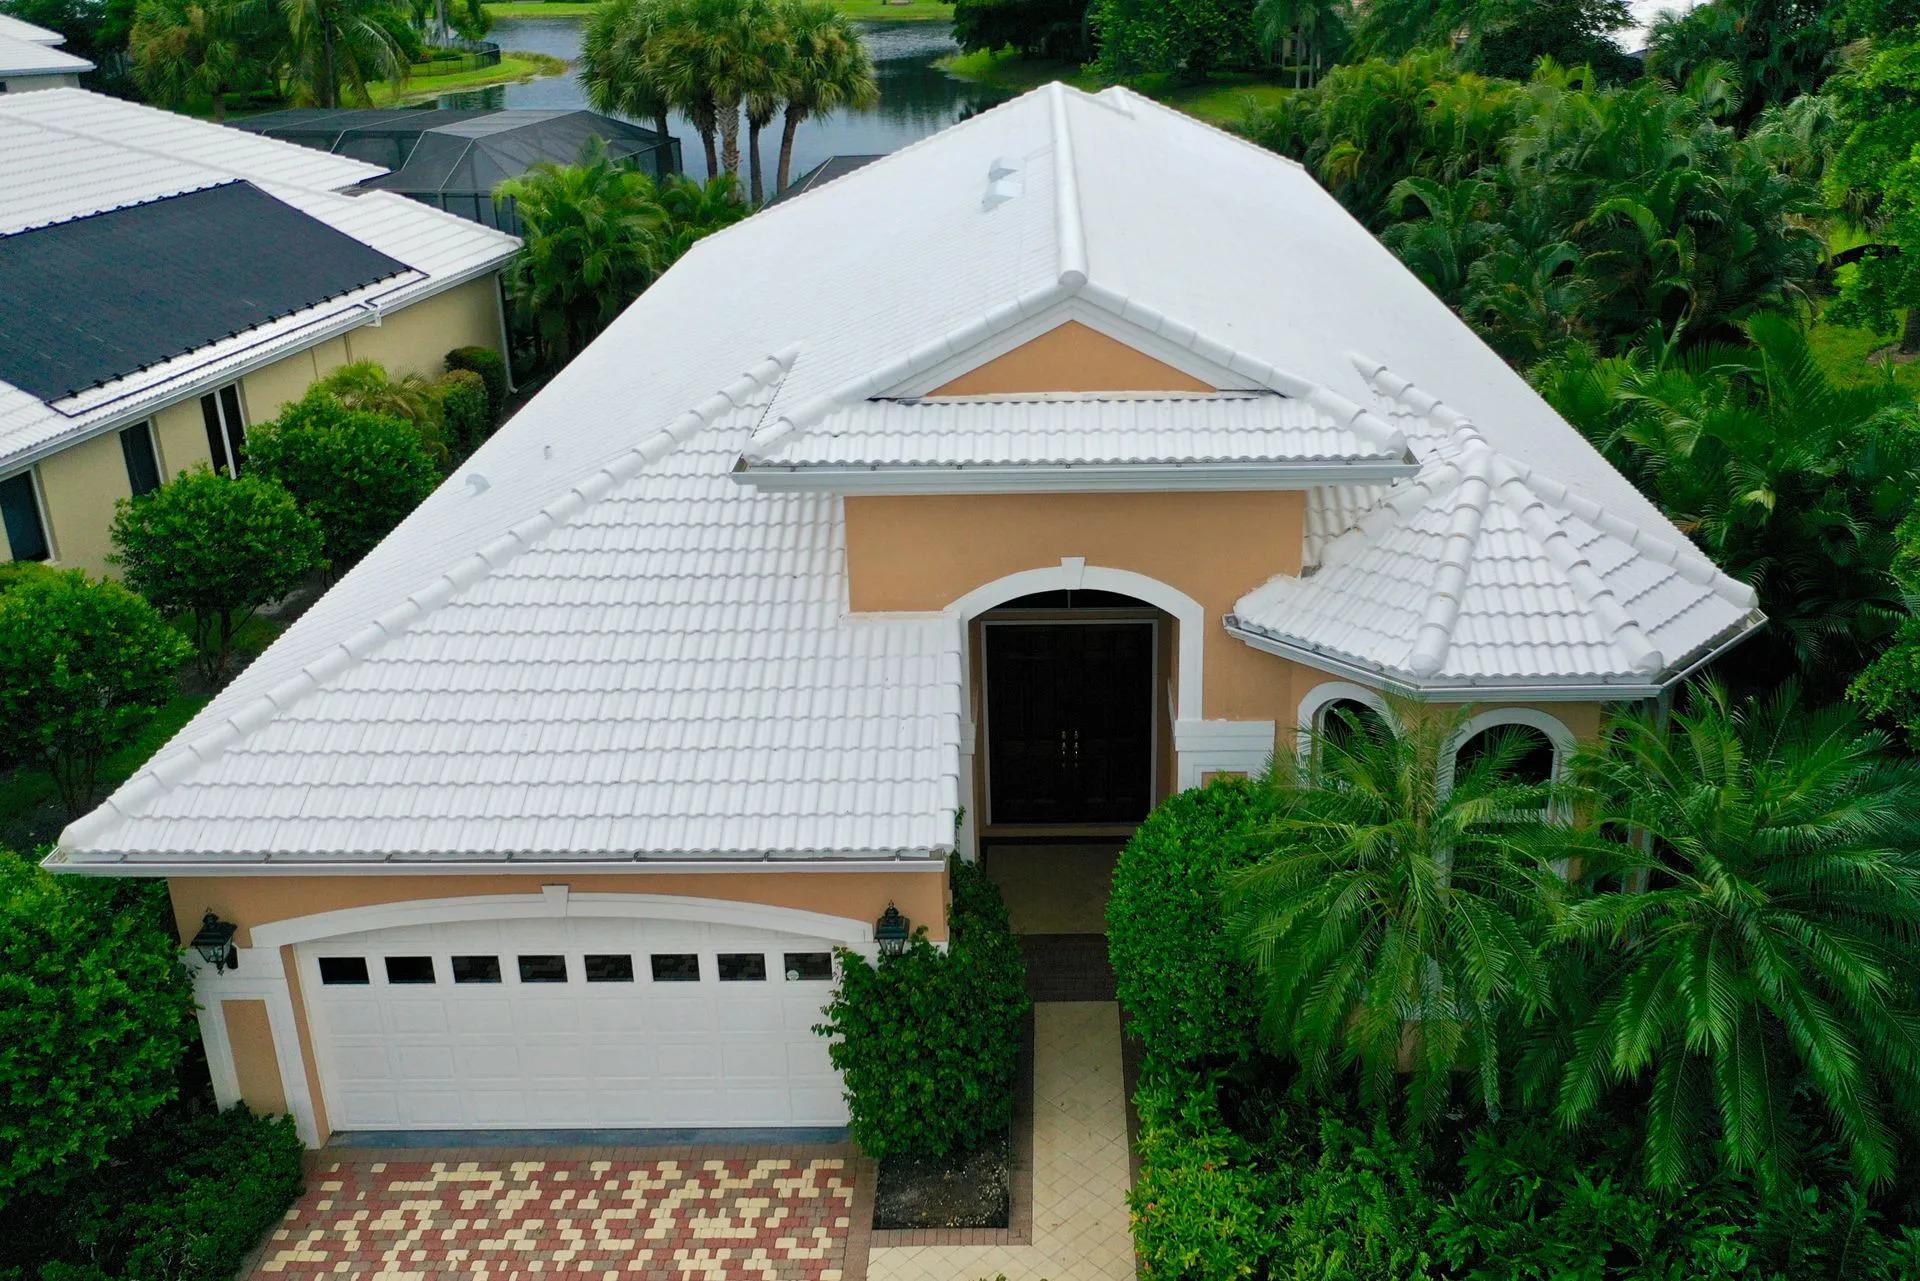 an aerial view of a house with a white roof surrounded by trees.